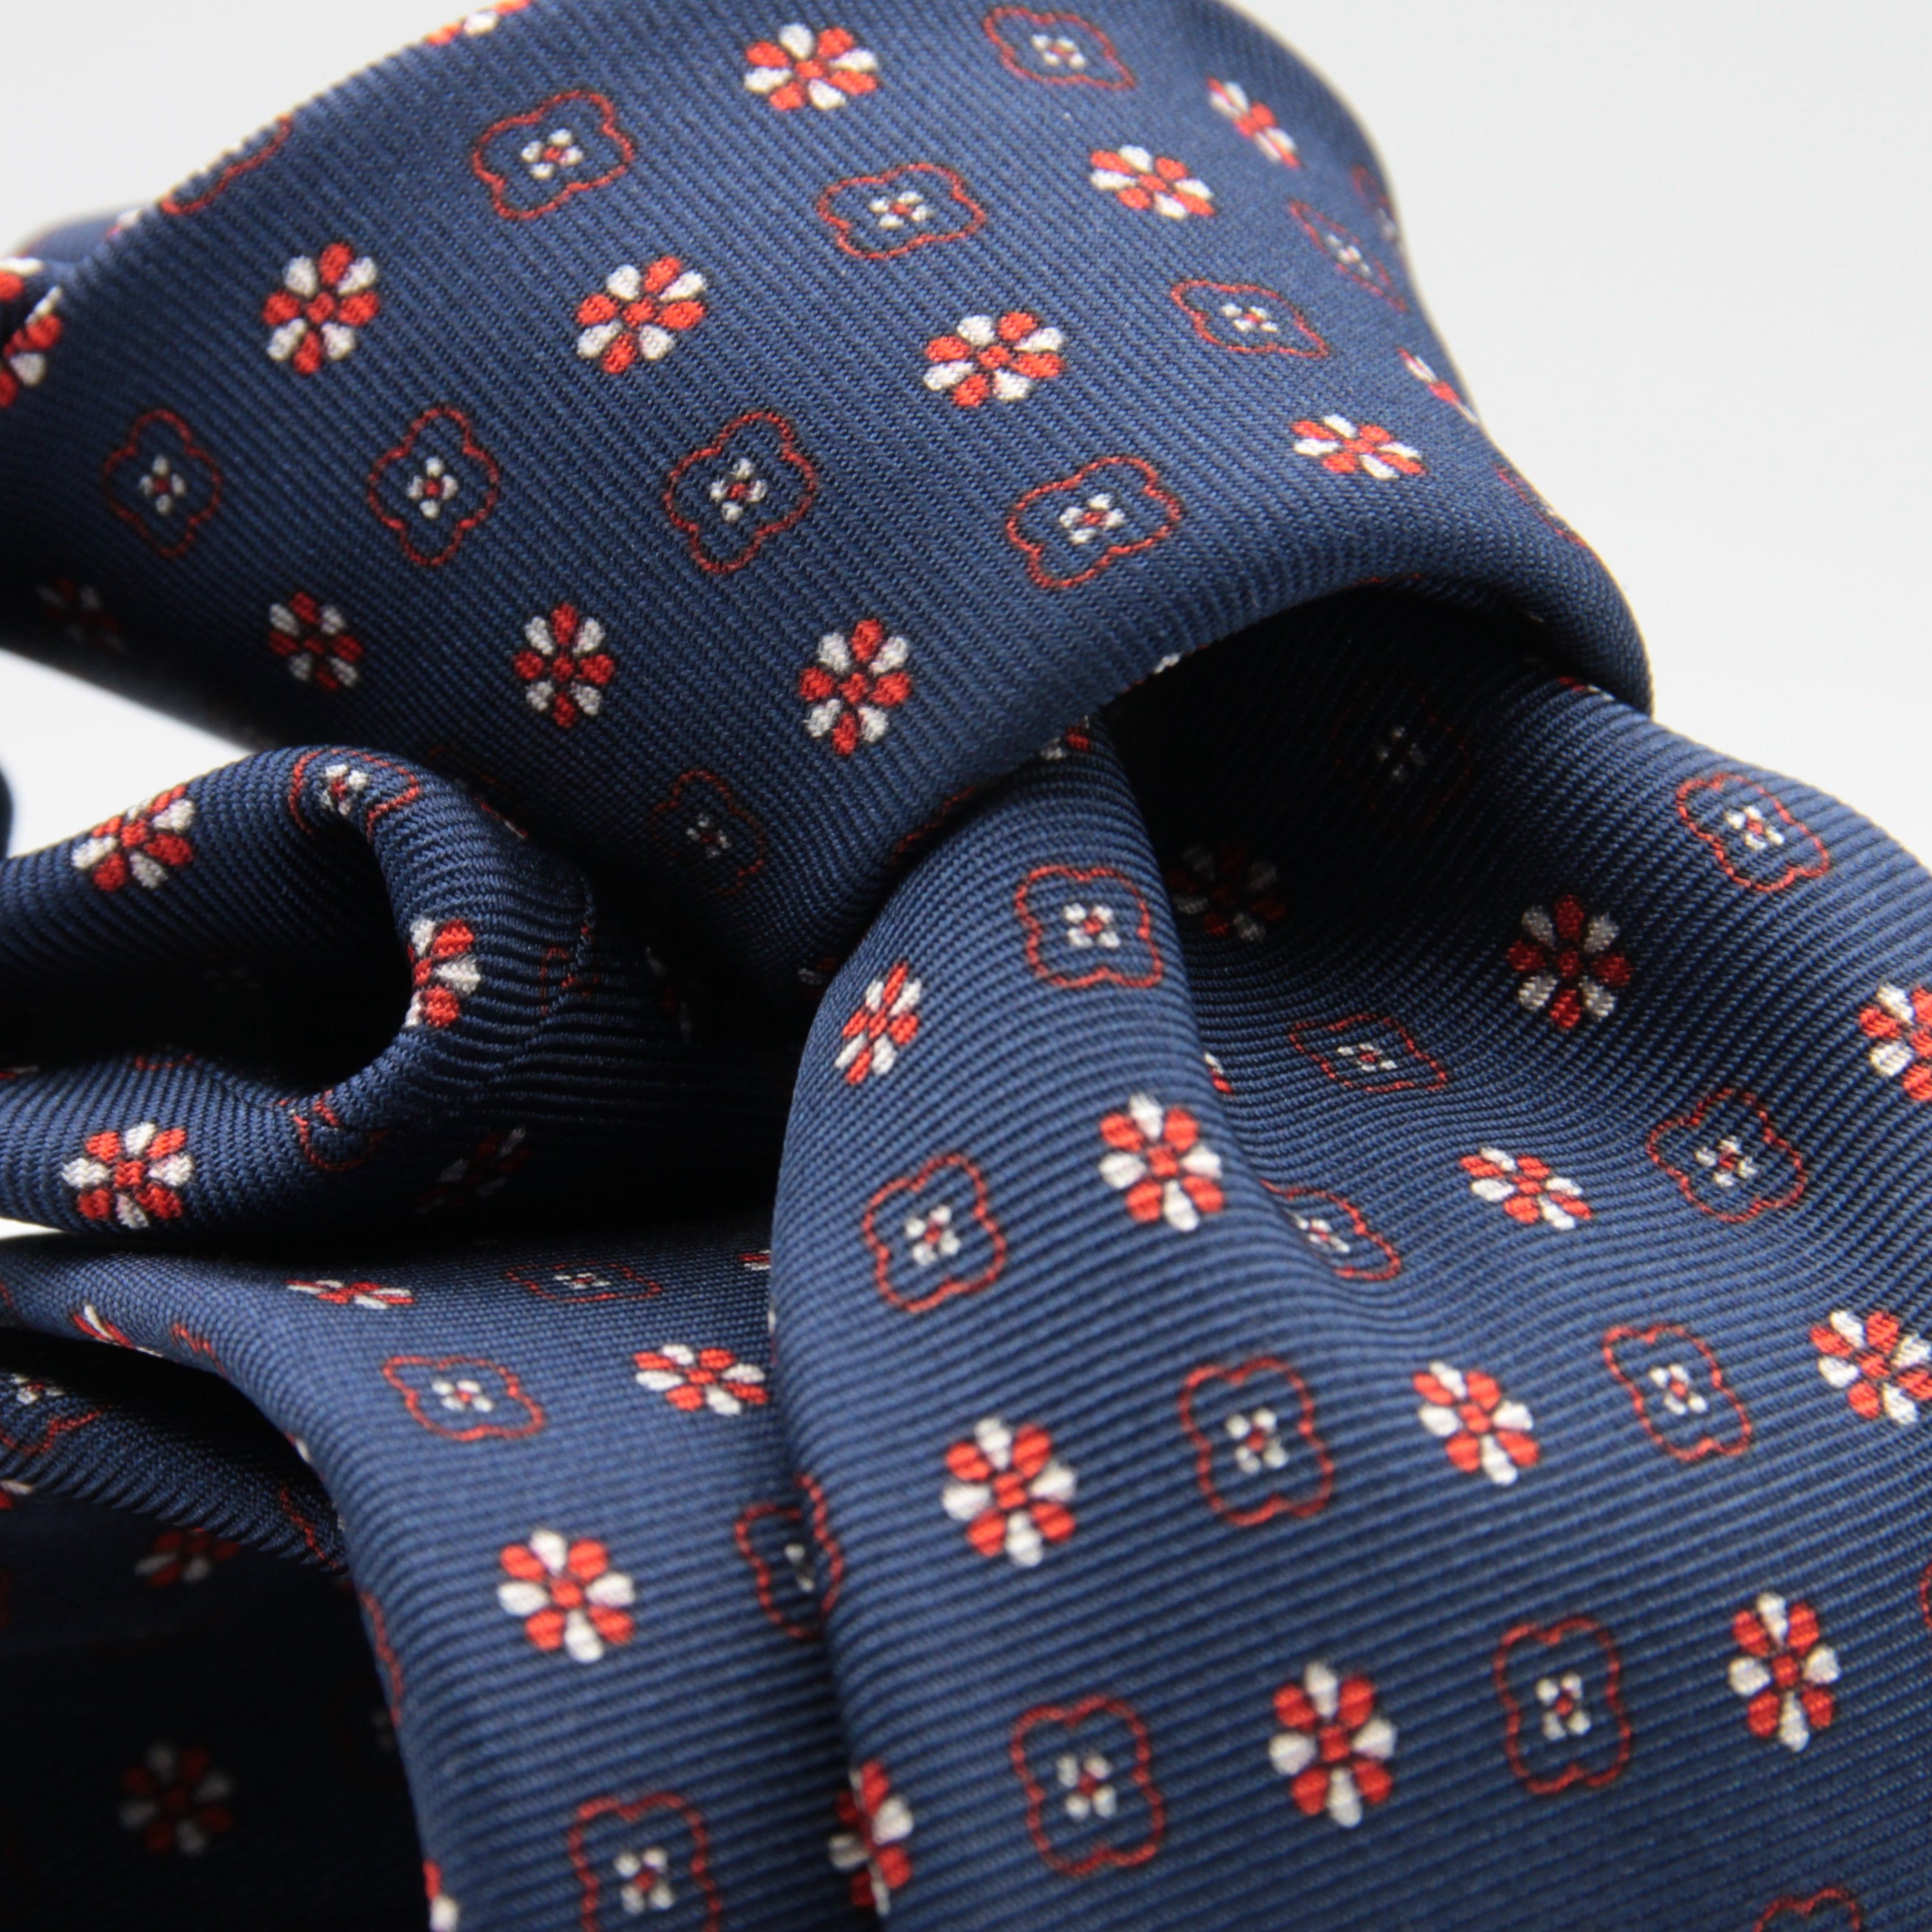 Holliday & Brown for Cruciani & Bella 100% printed Silk Self tipped Blue, Red and White motif tie Handmade in Italy 8 cm x 150 cm #6979